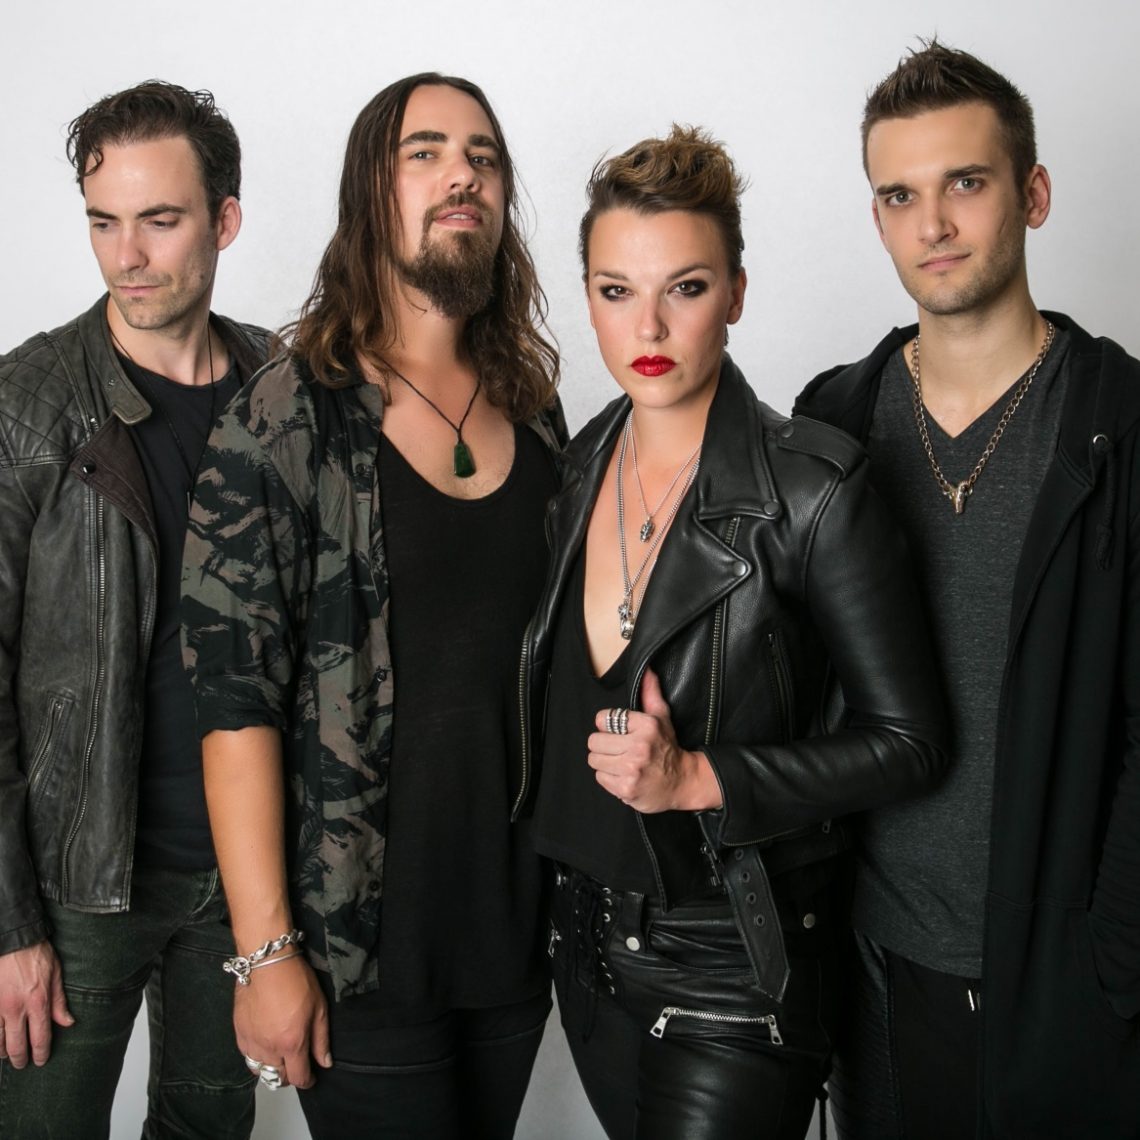 HALESTORM sell out biggest tour, confirm support